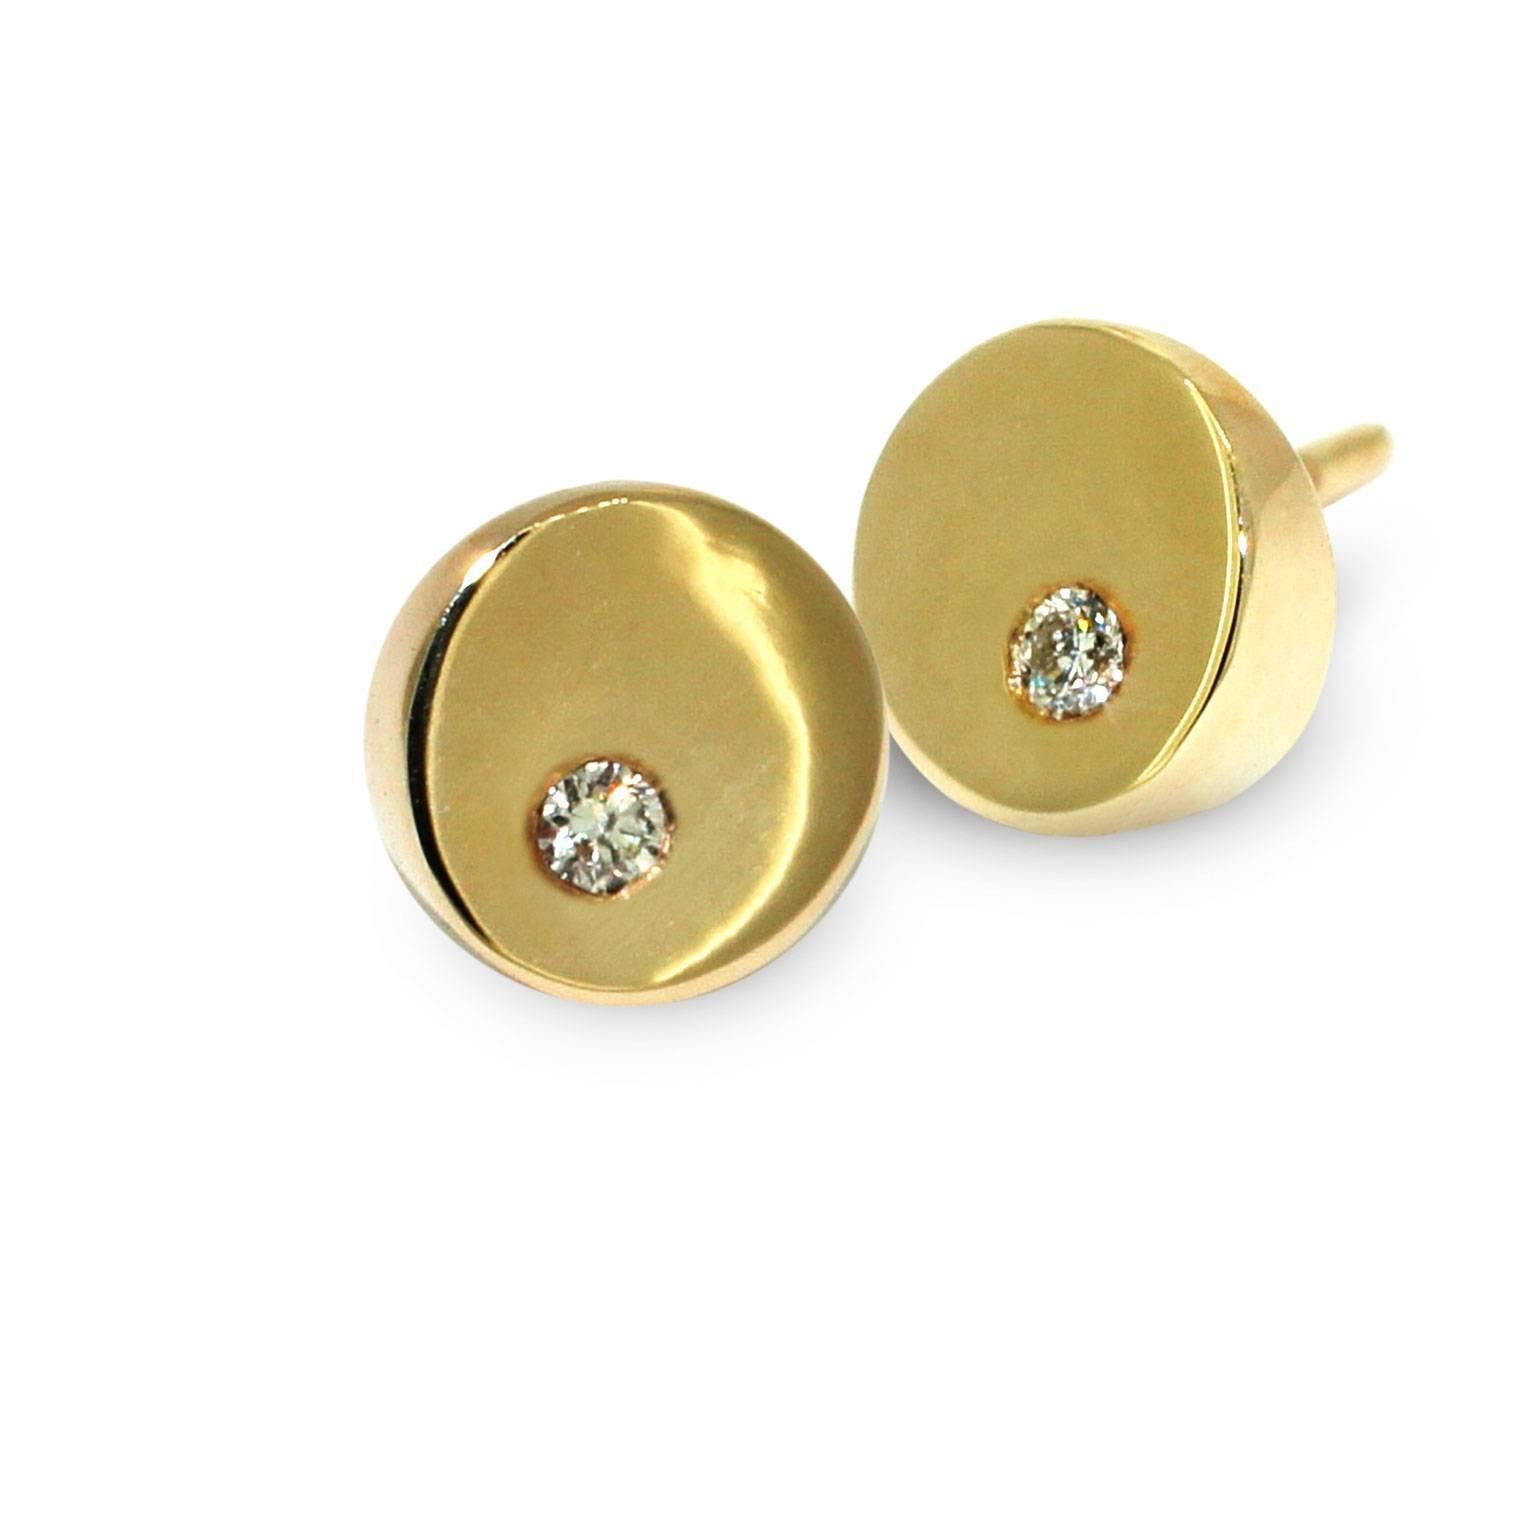 These minimalist, geometric stud earrings’ design was inspired by clean lines of geometry. With one side of the disc thicker than the other, these simple, elegant earrings are versatile and infinitely wearable. 

Crafted in Sydney, in 9 karat yellow